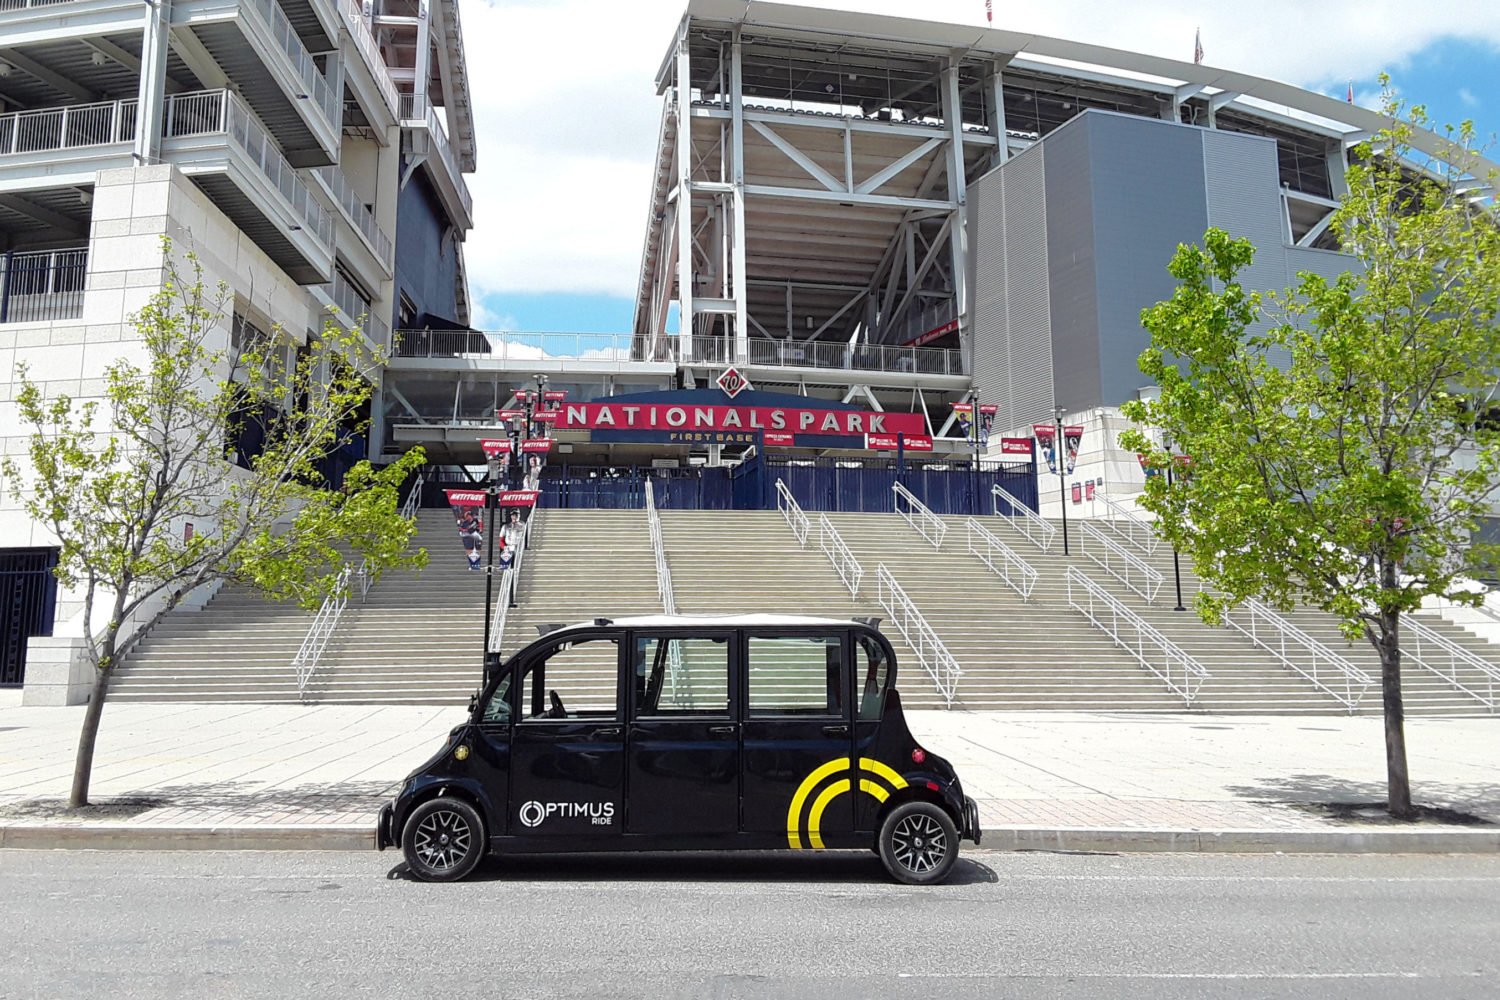 The car in front of Nats Park. Photo courtesy of the Yards and Optimus Ride.